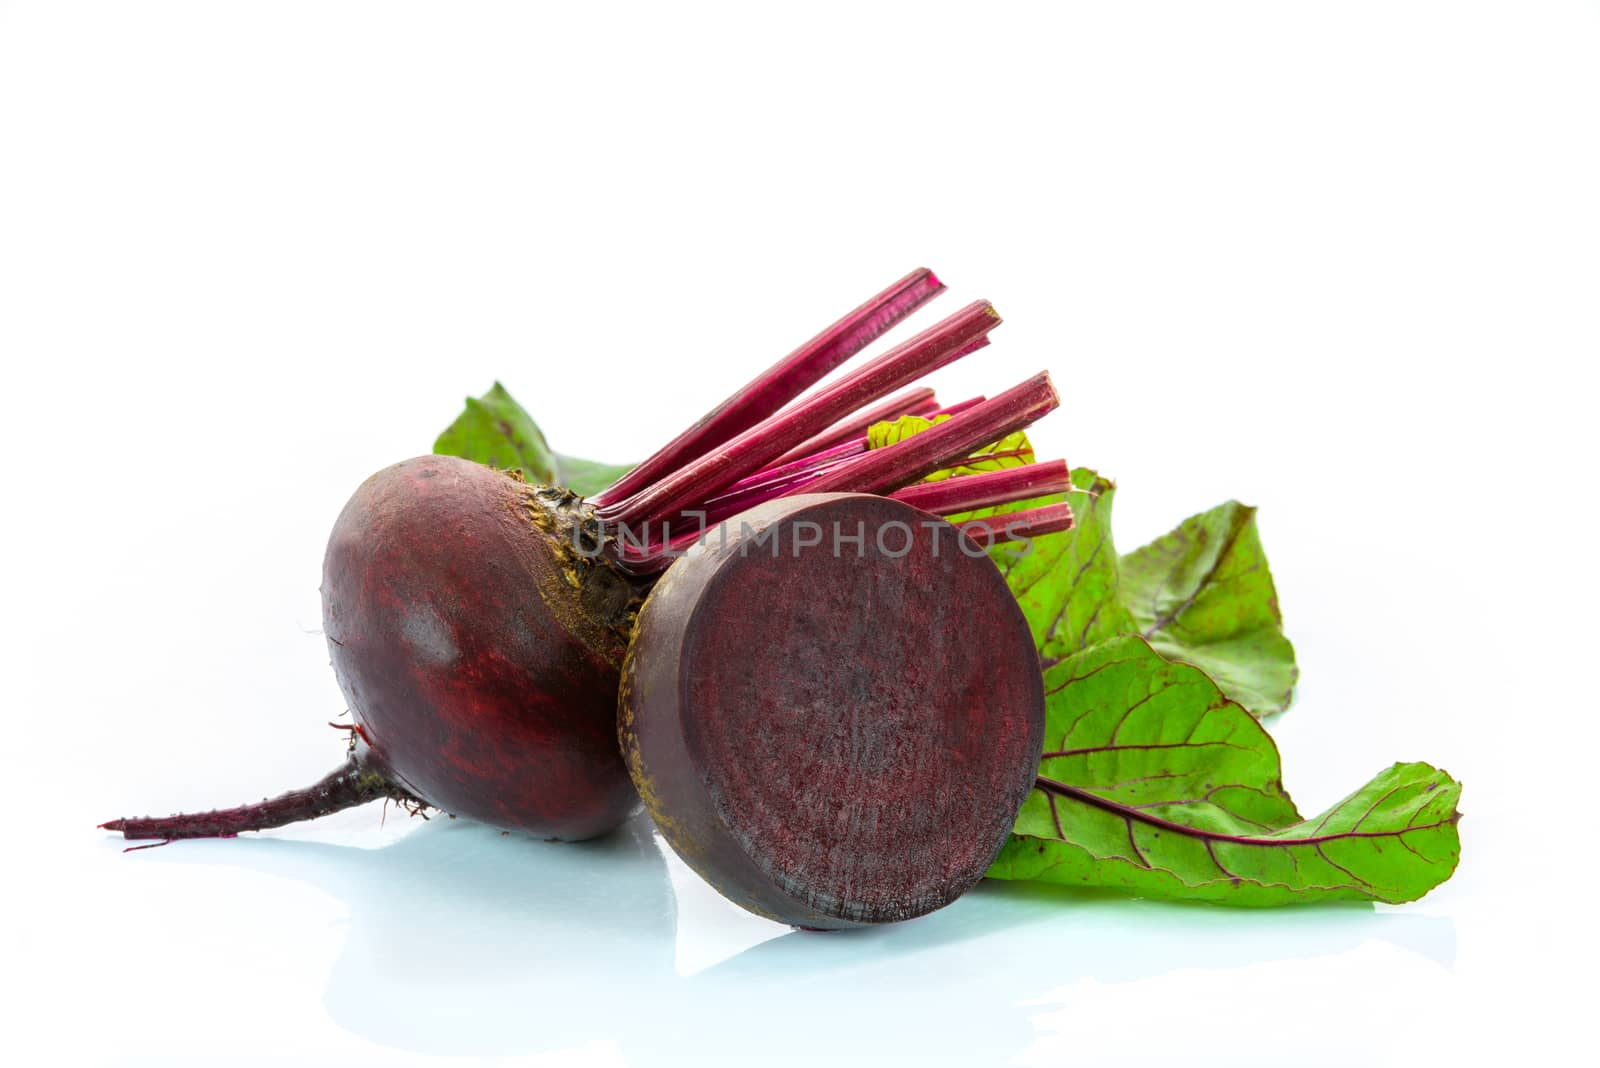 Healthy and organic beets by wdnet_studio